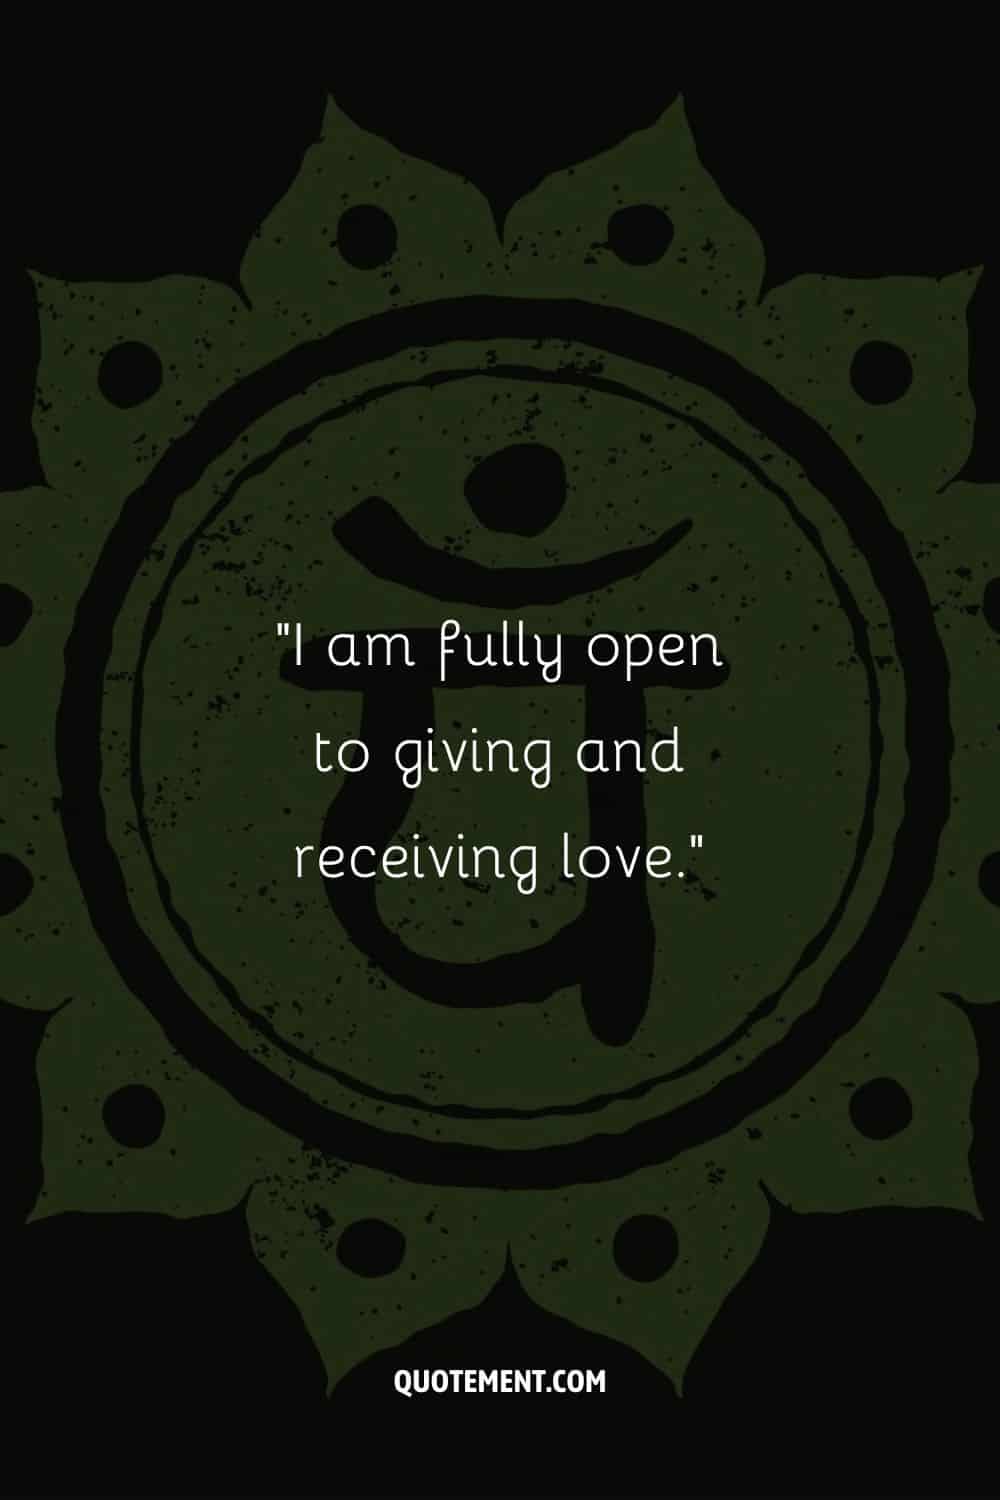 I am fully open to giving and receiving love.